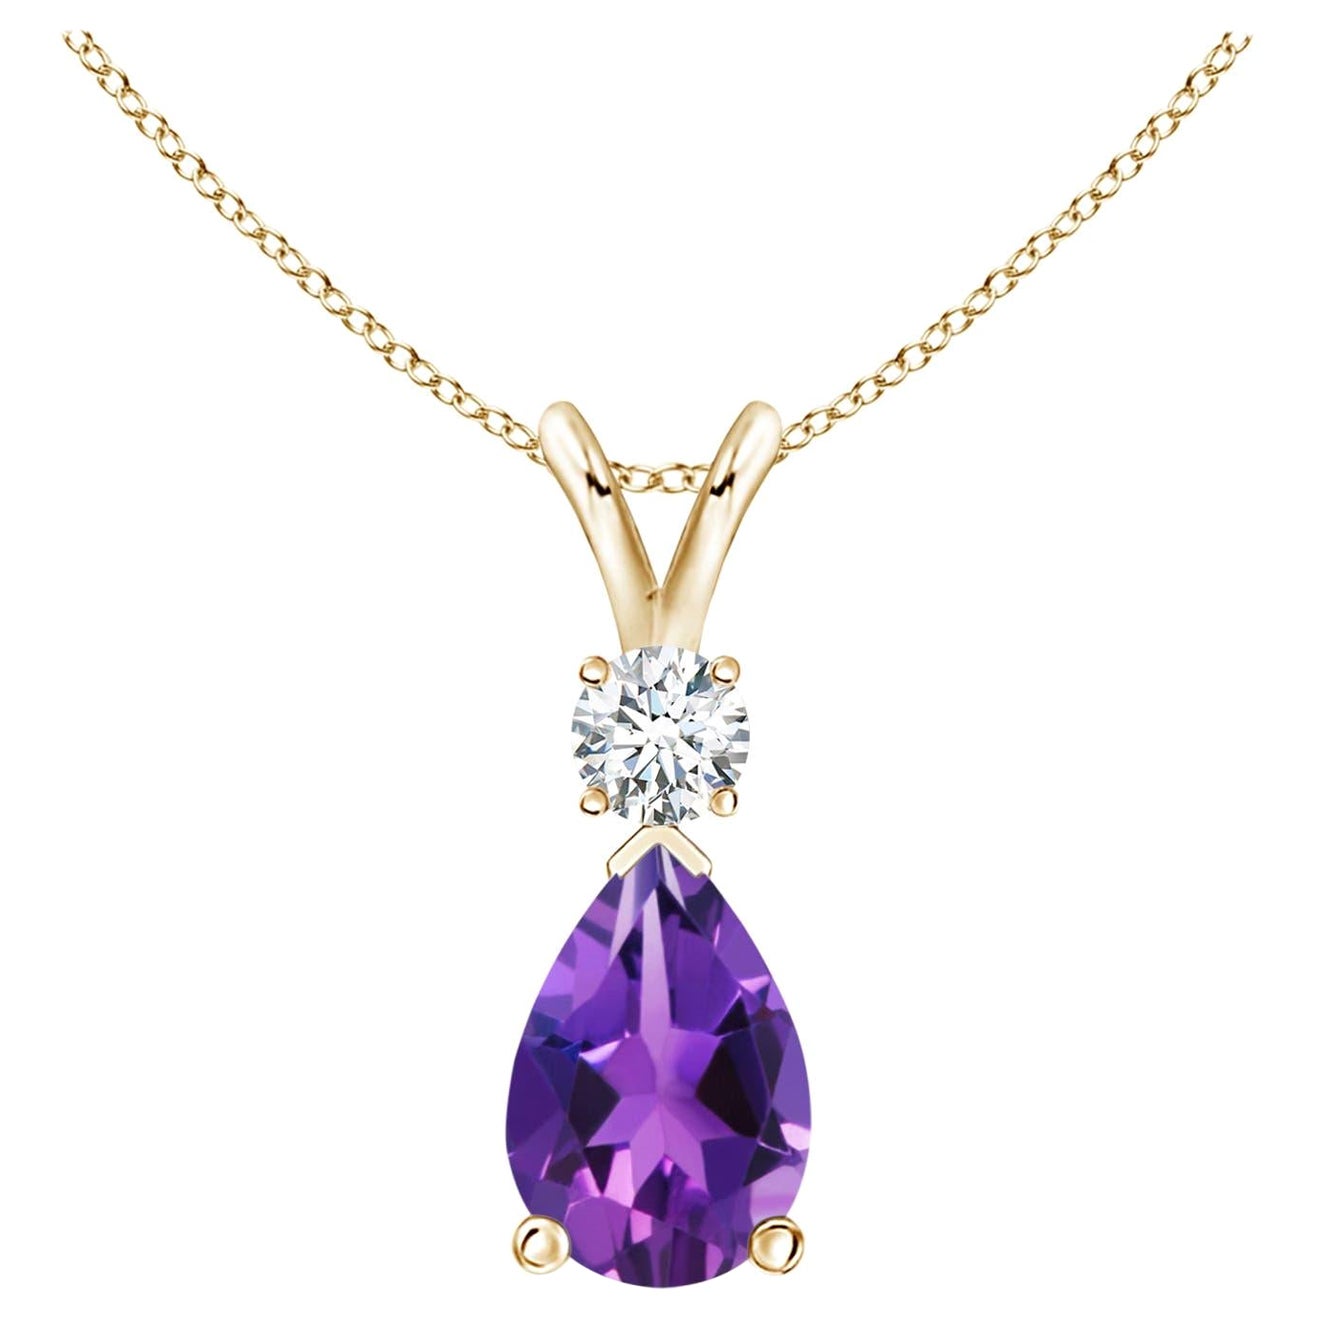 Natural 1.6 ct Amethyst Teardrop Pendant with Diamond in 14K Yellow Gold